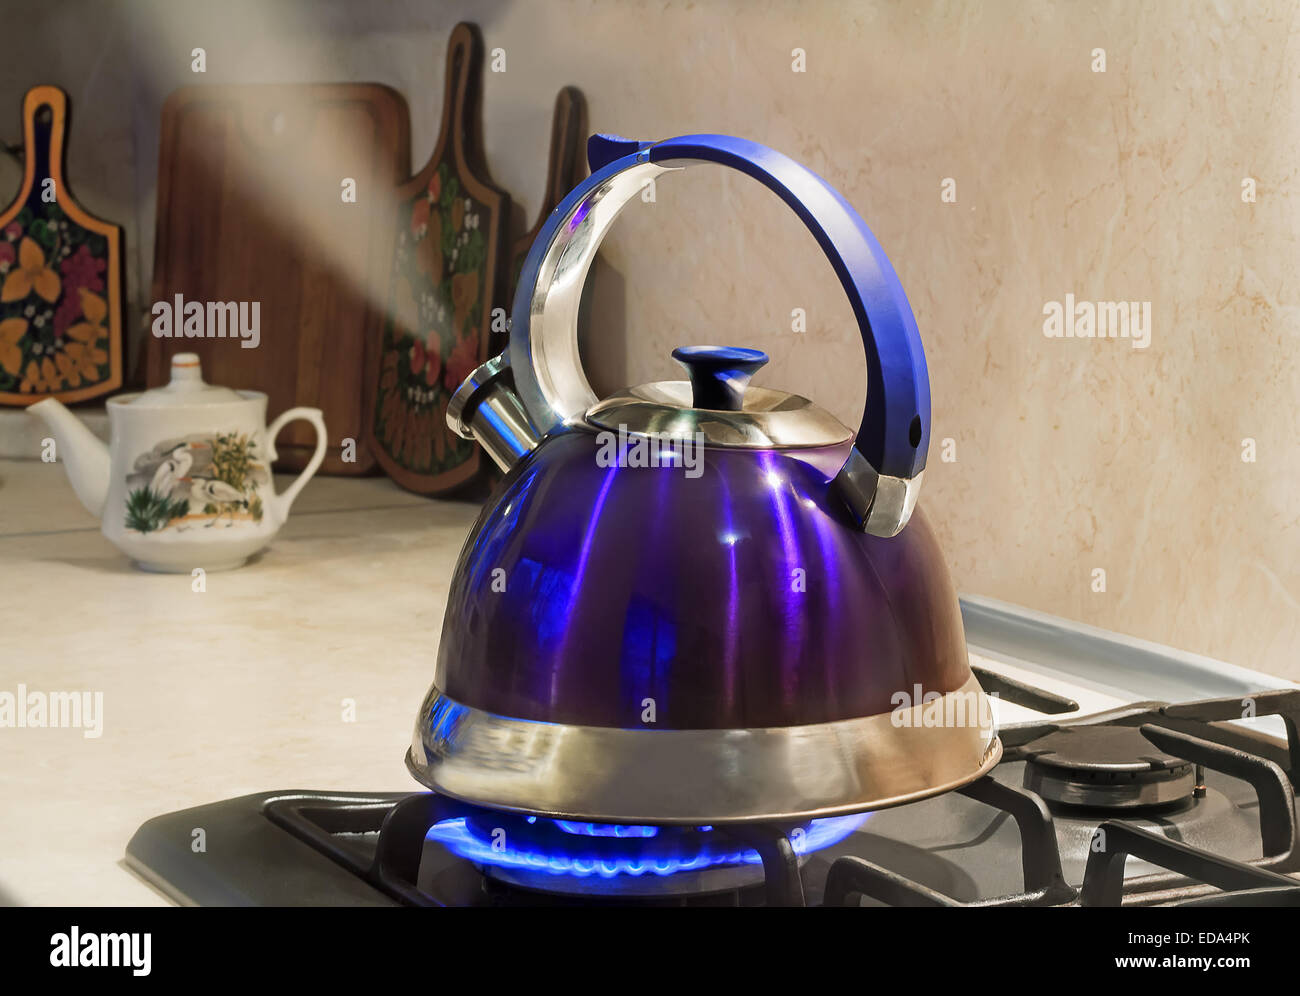 A Camping Tea Kettle On A Propane Stove Next To A Metal Cup Stock Photo,  Picture and Royalty Free Image. Image 42657632.